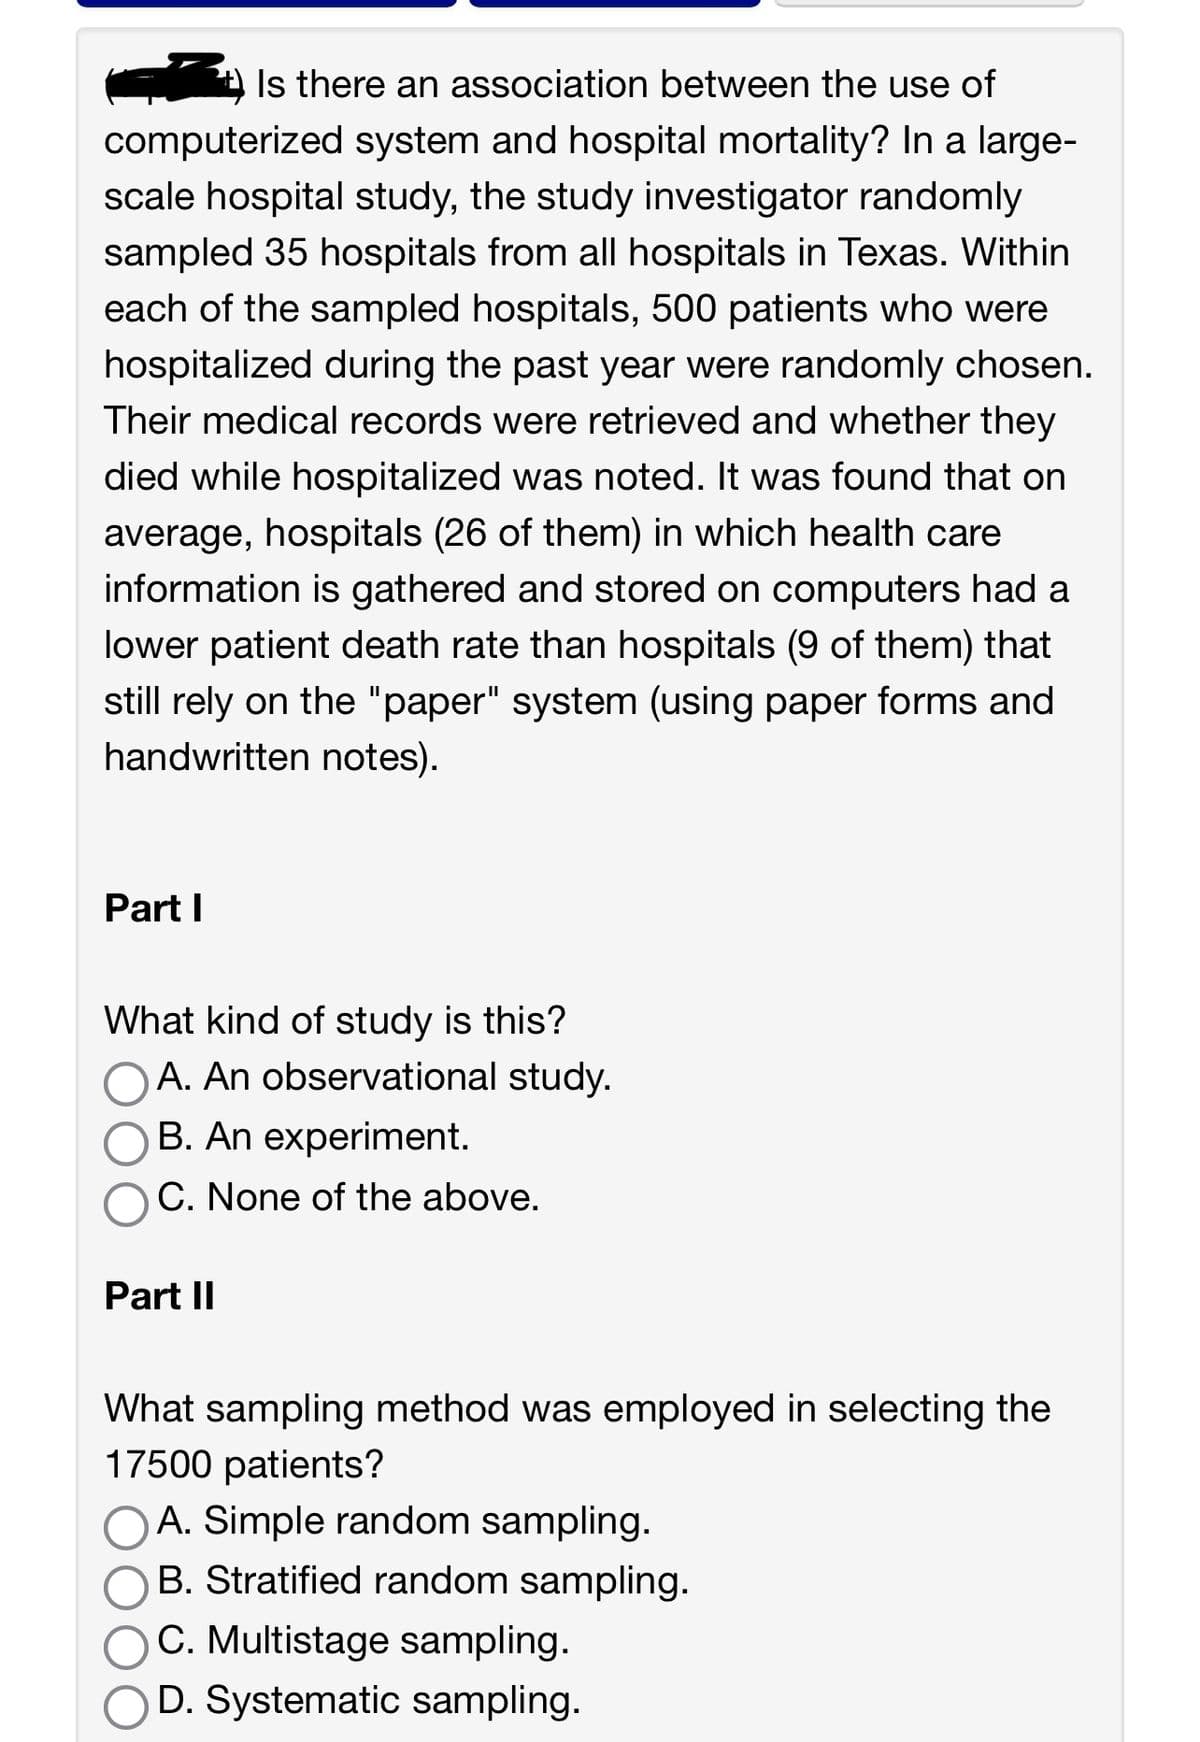 Is there an association between the use of
computerized system and hospital mortality? In a large-
scale hospital study, the study investigator randomly
sampled 35 hospitals from all hospitals in Texas. Within
each of the sampled hospitals, 500 patients who were
hospitalized during the past year were randomly chosen.
Their medical records were retrieved and whether they
died while hospitalized was noted. It was found that on
average, hospitals (26 of them) in which health care
information is gathered and stored on computers had a
lower patient death rate than hospitals (9 of them) that
still rely on the "paper" system (using paper forms and
handwritten notes).
Part I
What kind of study is this?
A. An observational study.
B. An experiment.
C. None of the above.
Part II
What sampling method was employed in selecting the
17500 patients?
A. Simple random sampling.
B. Stratified random sampling.
C. Multistage sampling.
D. Systematic sampling.